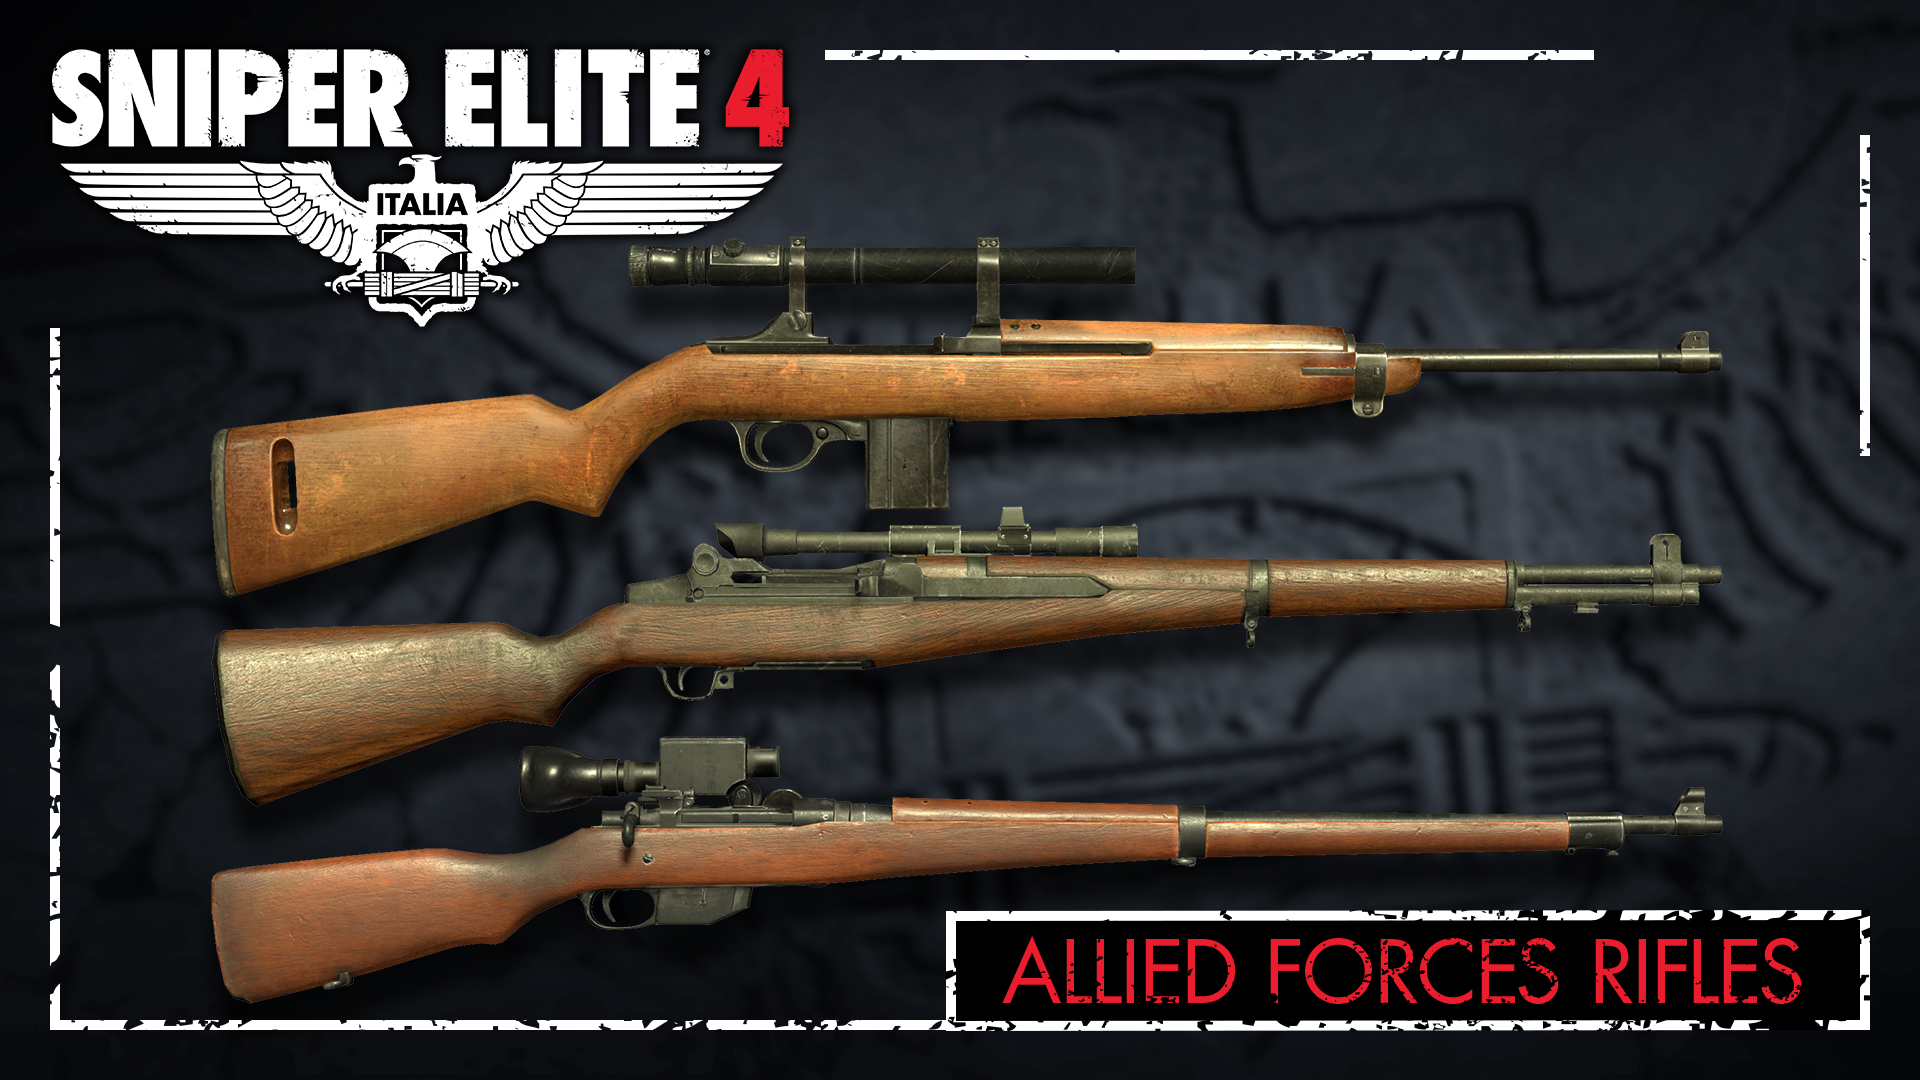 Sniper Elite 4 - Allied Forces Rifle Pack DLC Steam CD Key [USD 4.51]